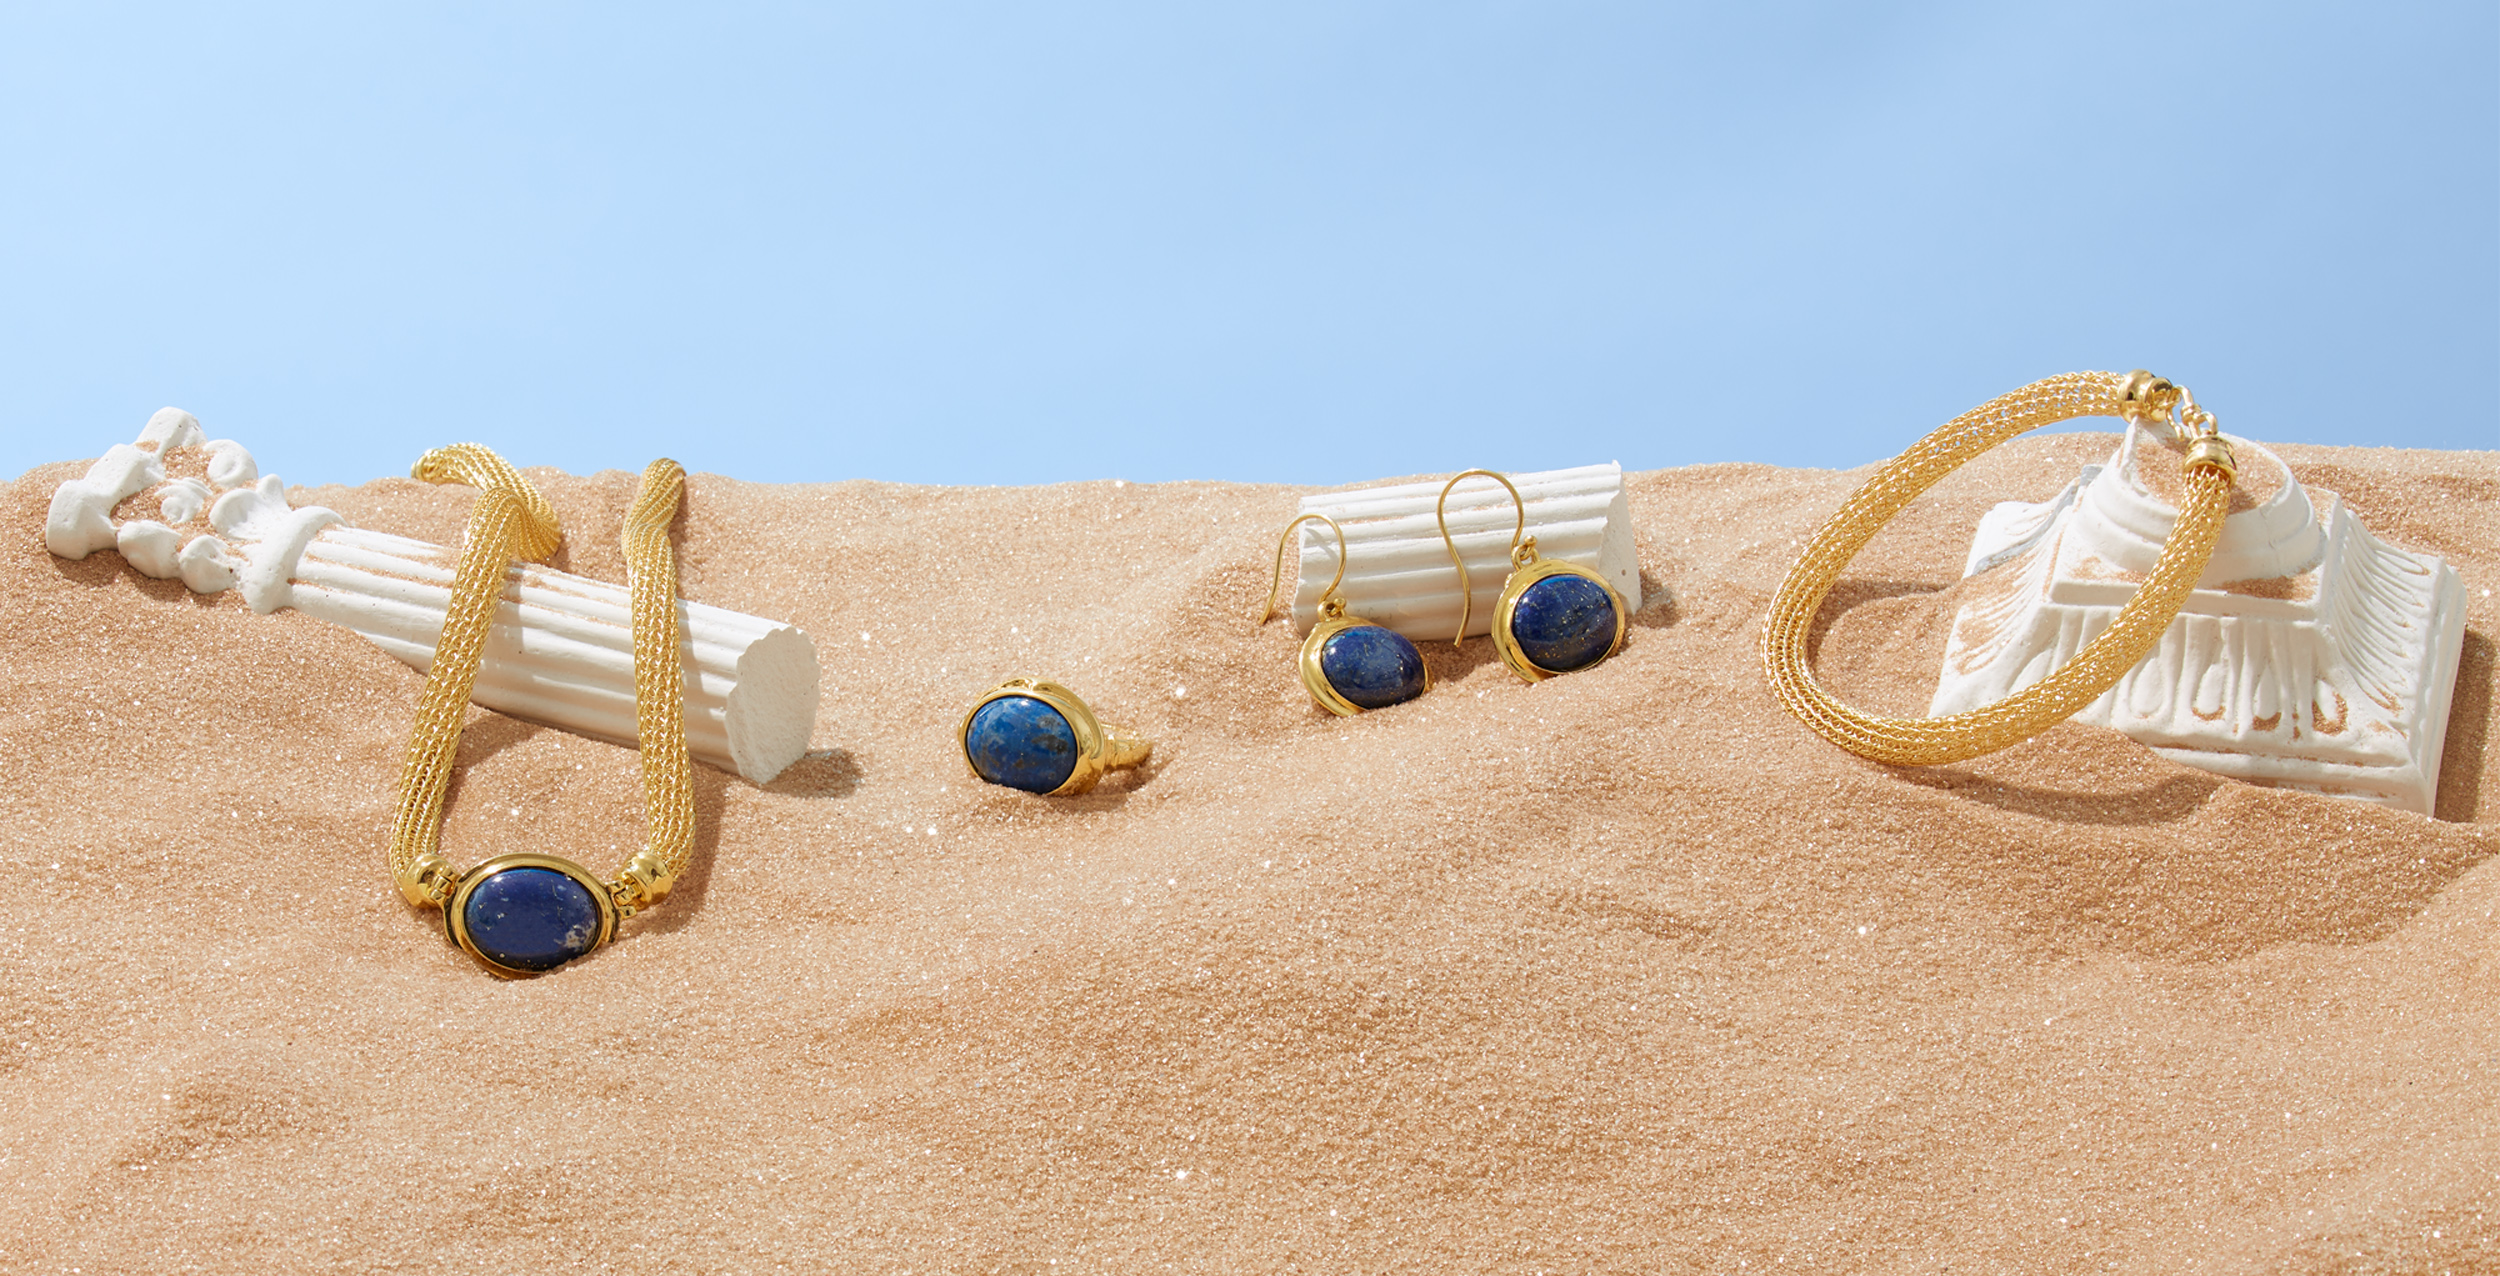 marketing still life photograph of gold and lapis cabochon jewelry draped on ruins of marble columns in the desert